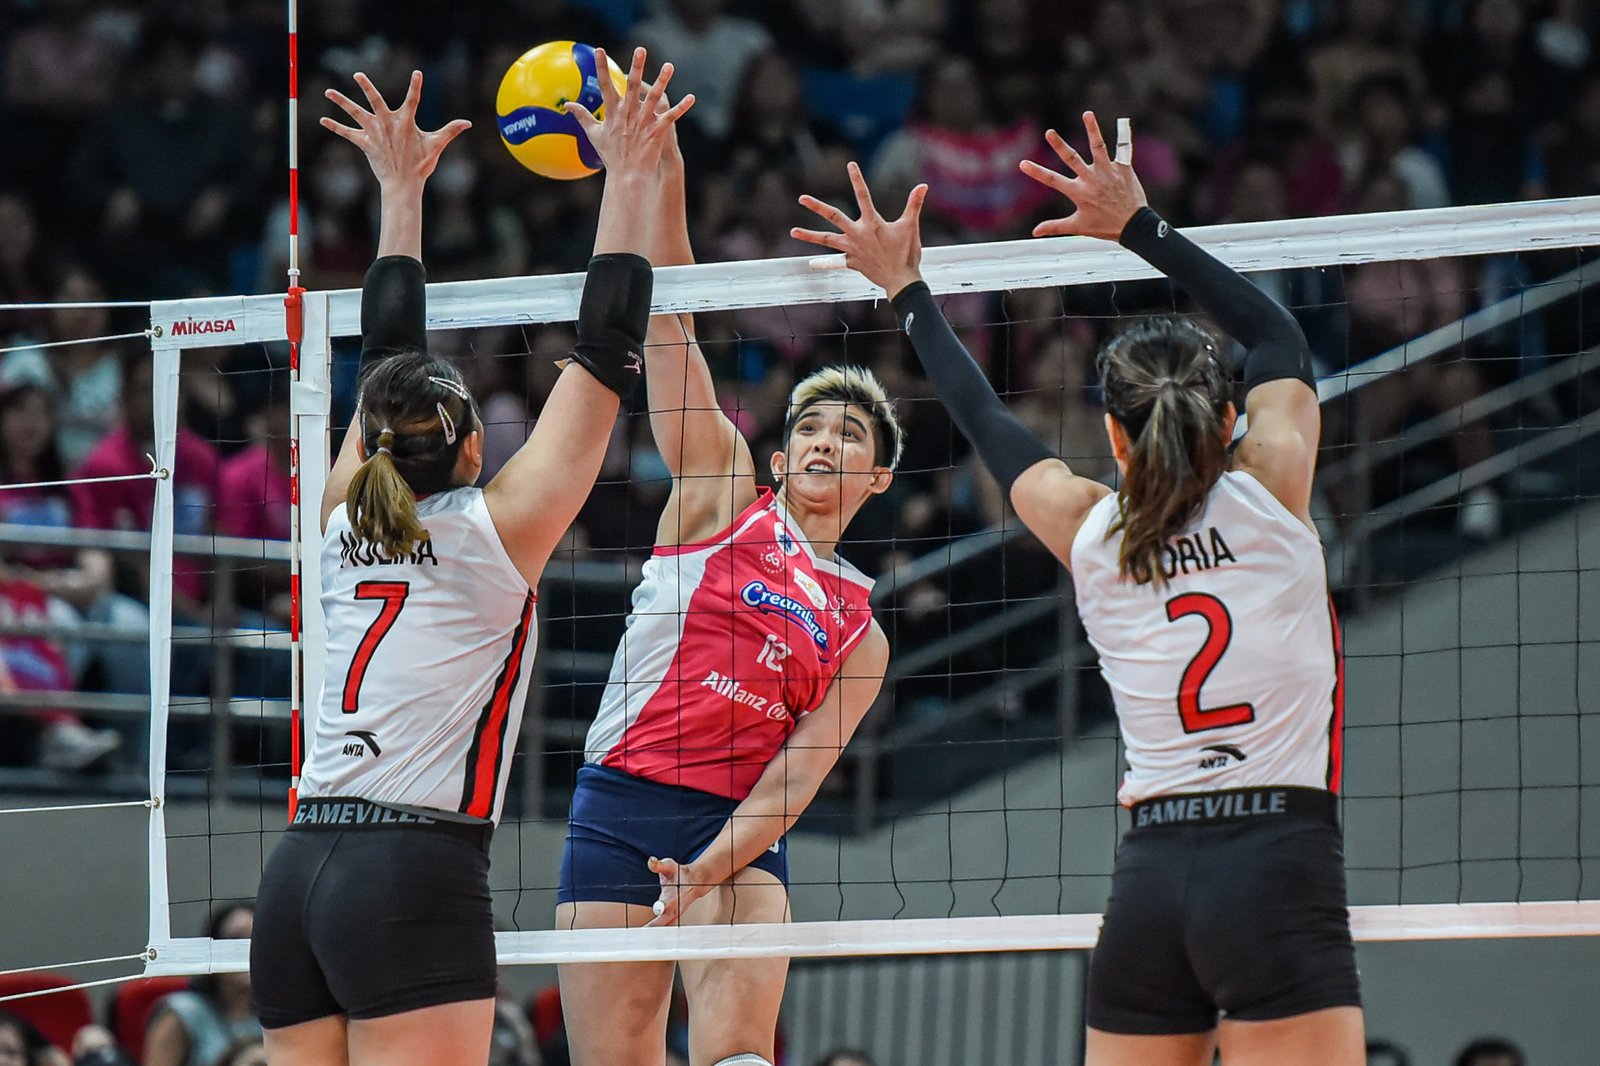 Losing not an option for Tots Carlos, Creamline in comeback win